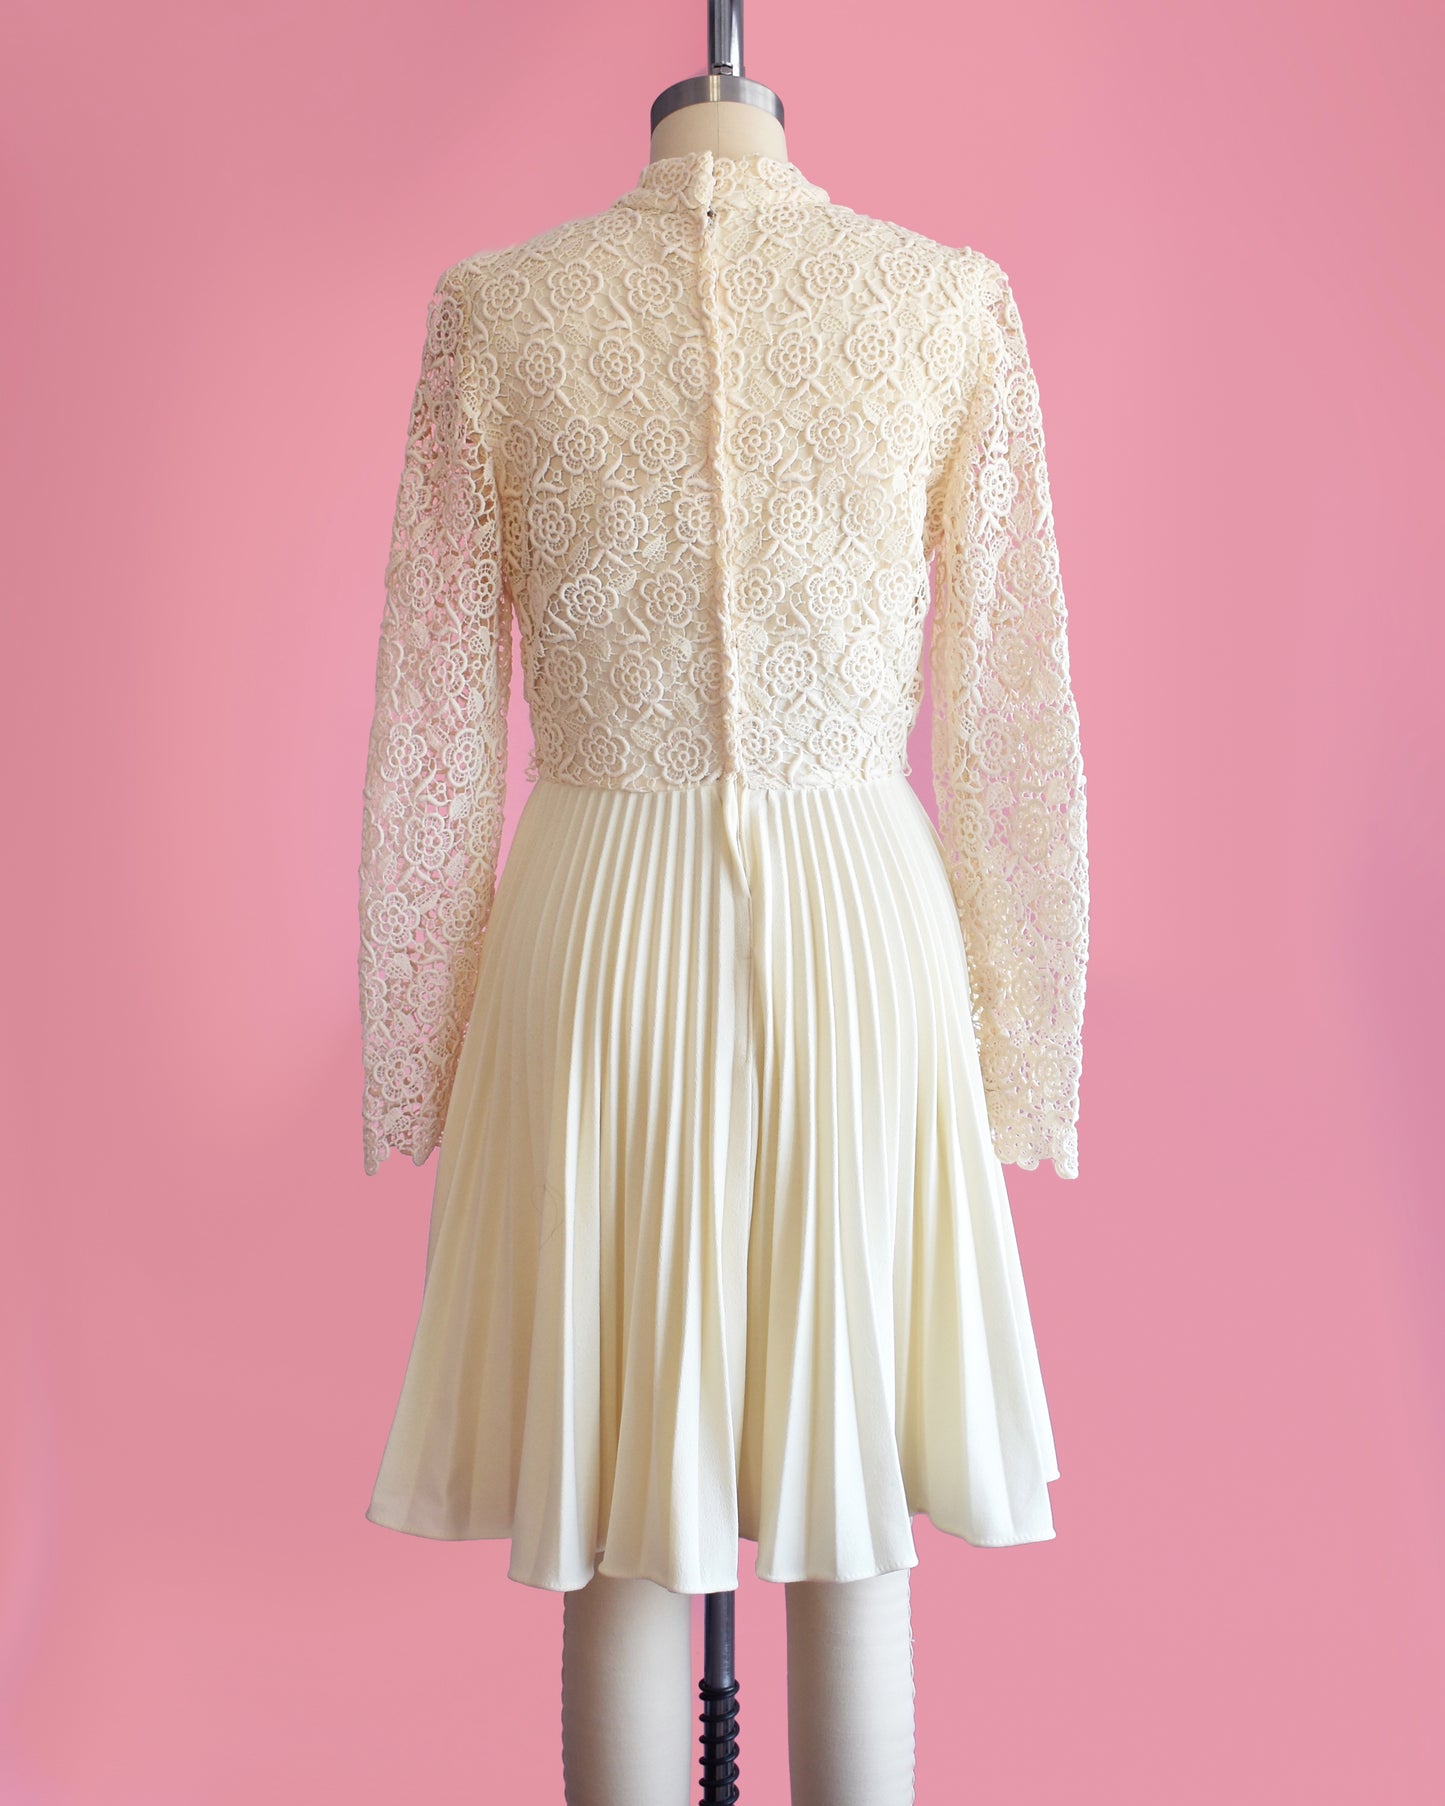 back view of a vintage 1970s crochet floral lace pleated dress